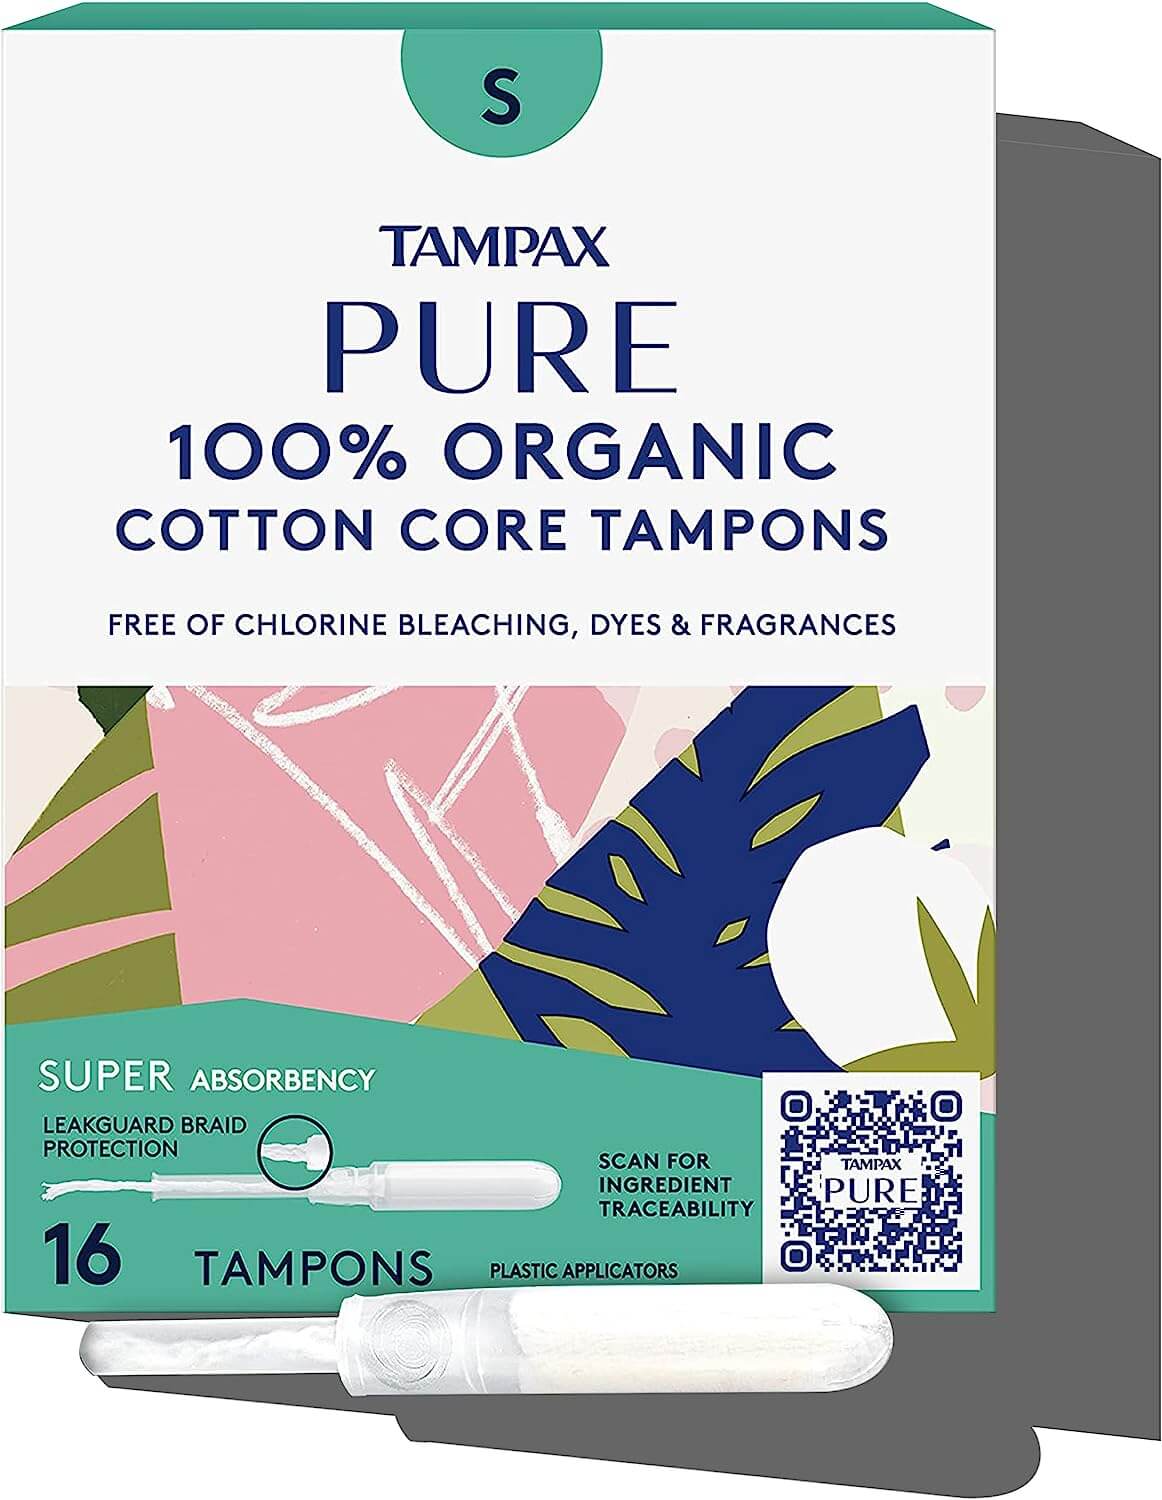 7 Best Organic Tampons – Top Tested Organic Period Products